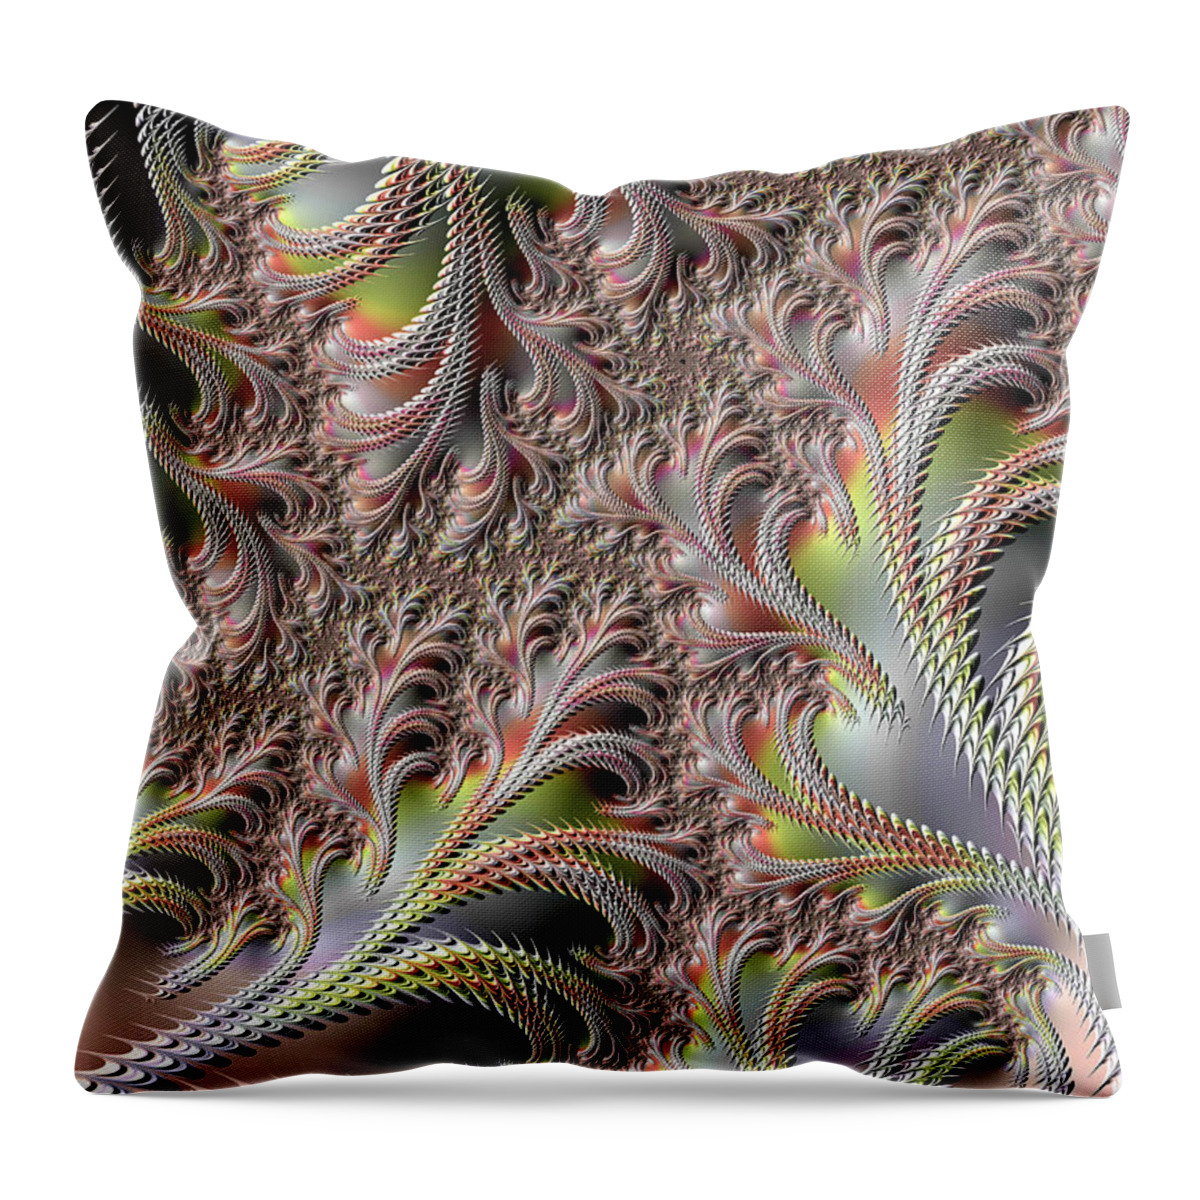 Abstract Throw Pillow featuring the digital art Cooling Fans by Michele A Loftus